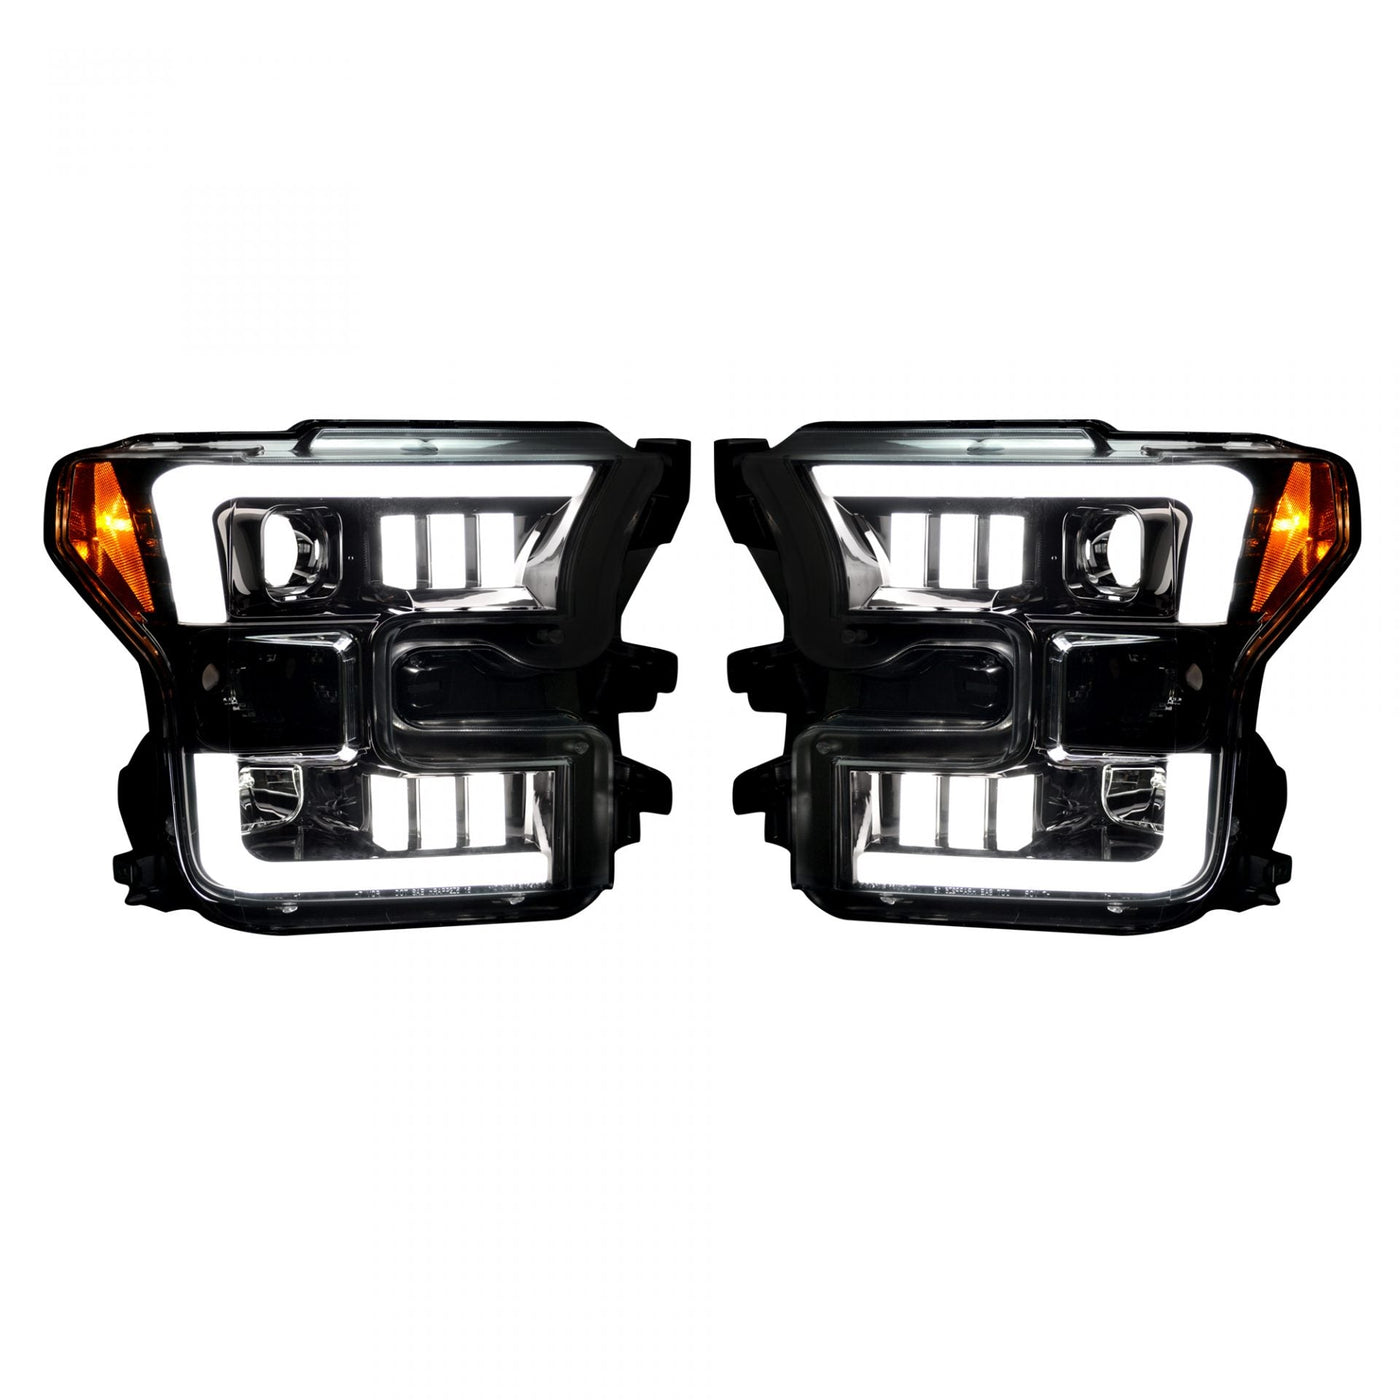 Ford Projector Headlights, F150 Projector Headlights, F150 15-17 Projector Headlights, Clear/Chrome Headlights, OLED Projector Headlights